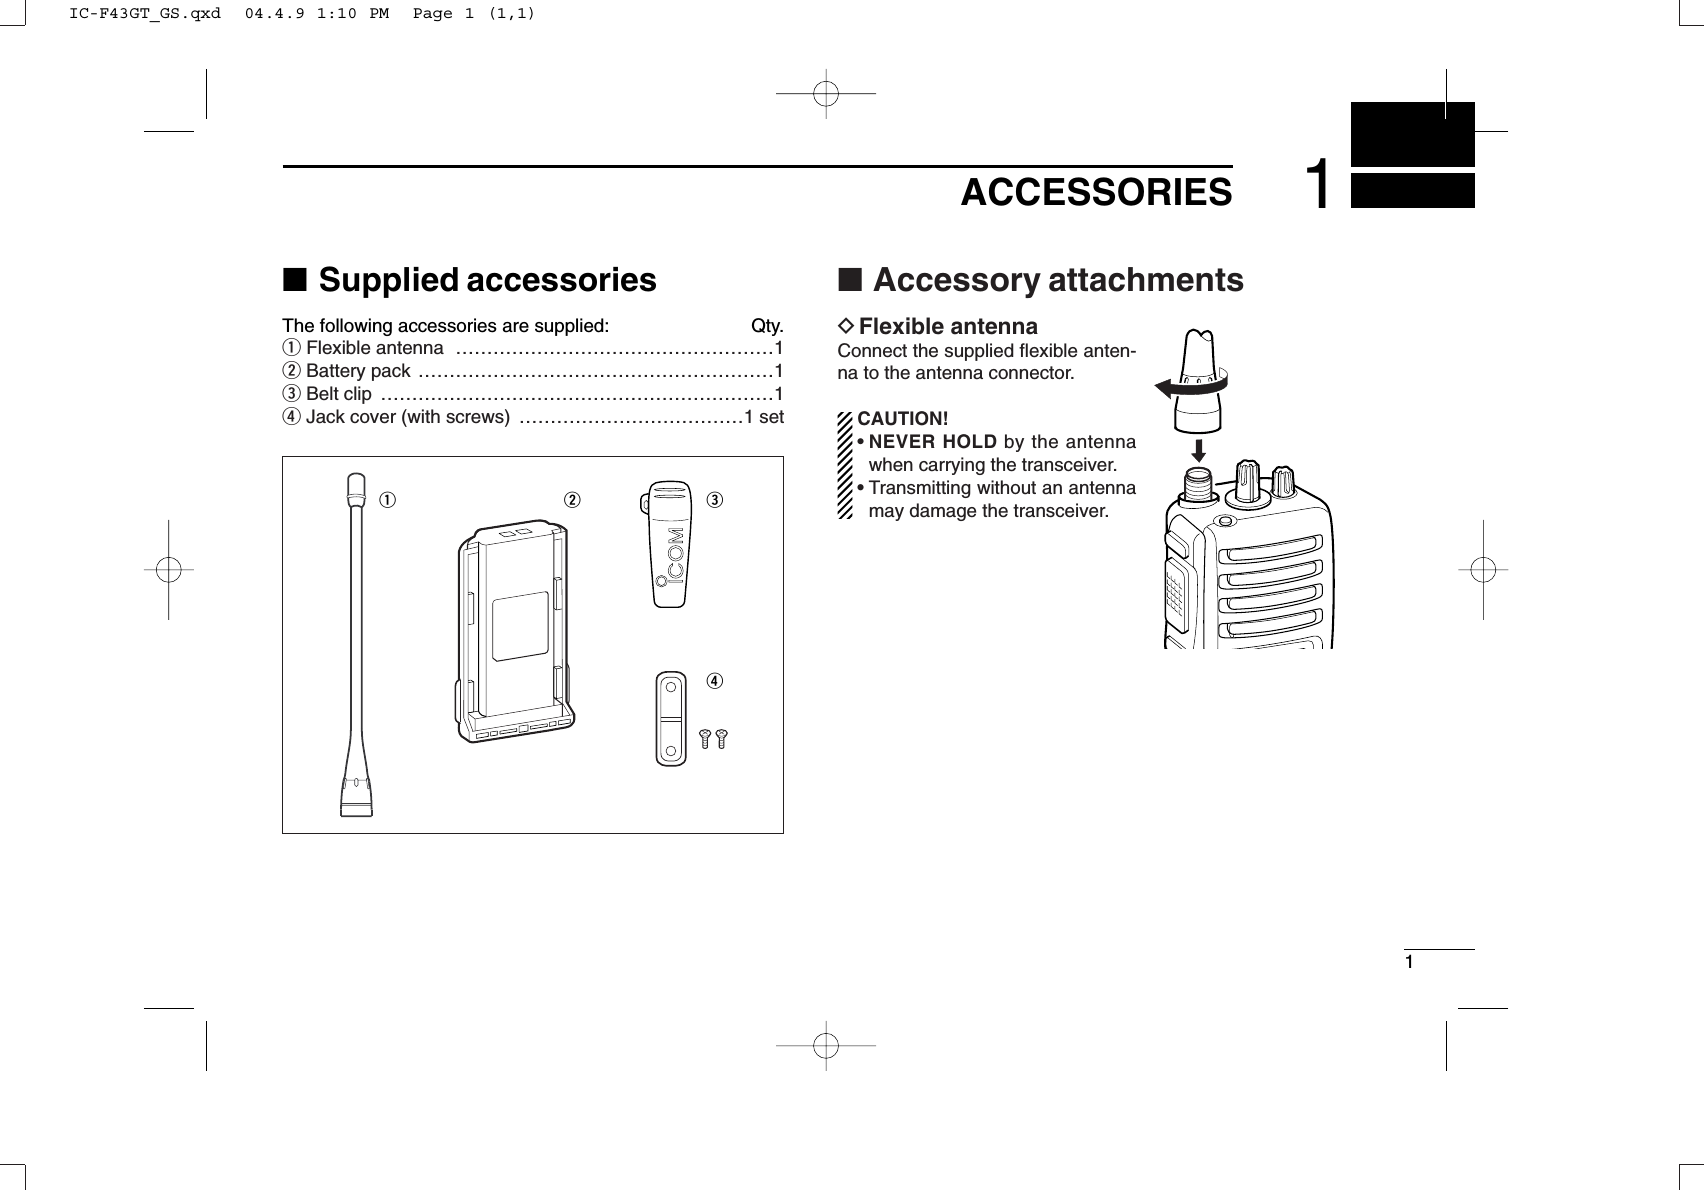 11ACCESSORIES■Supplied accessoriesThe following accessories are supplied: Qty.qFlexible antenna ……………………………………………1wBattery pack …………………………………………………1eBelt clip ………………………………………………………1rJack cover (with screws) ………………………………1 set■Accessory attachmentsDFlexible antennaConnect the supplied ﬂexible anten-na to the antenna connector.CAUTION!• NEVER HOLD by the antennawhen carrying the transceiver.• Transmitting without an antennamay damage the transceiver.qwerIC-F43GT_GS.qxd  04.4.9 1:10 PM  Page 1 (1,1)